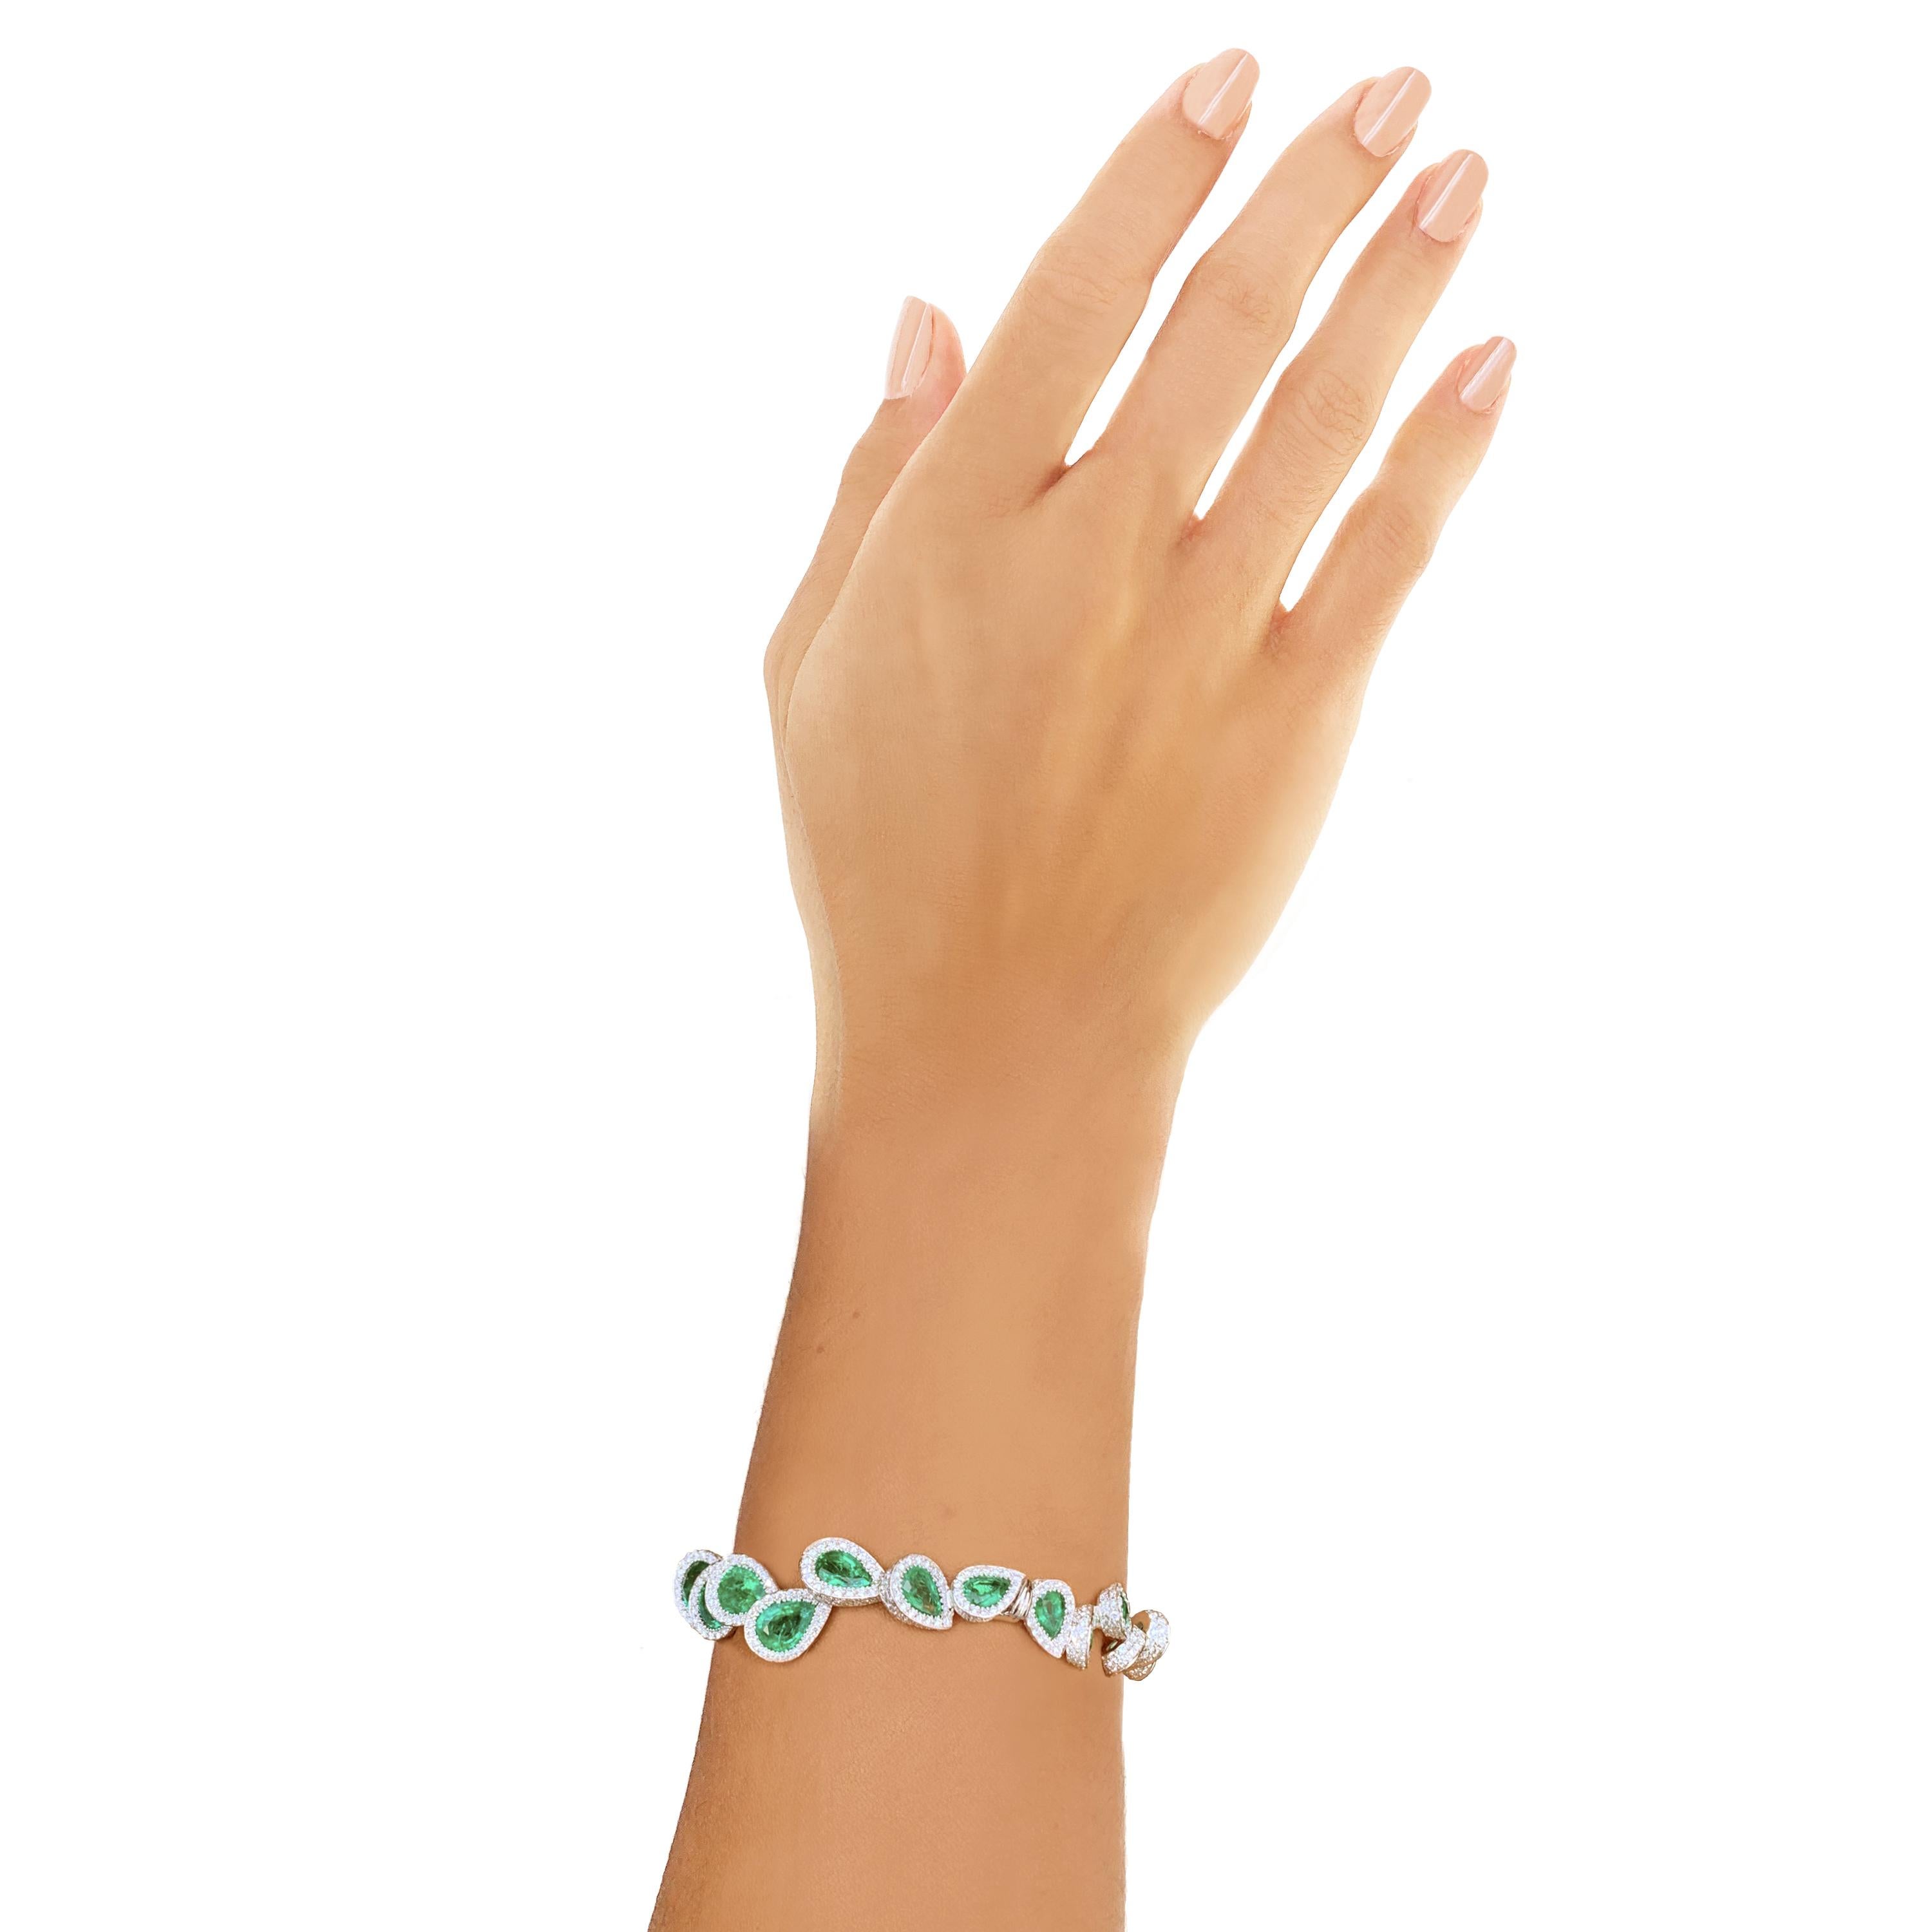 Rosior one-off GIA Certified Pear Cut Diamond and Emerald Bracelet in White Gold 3